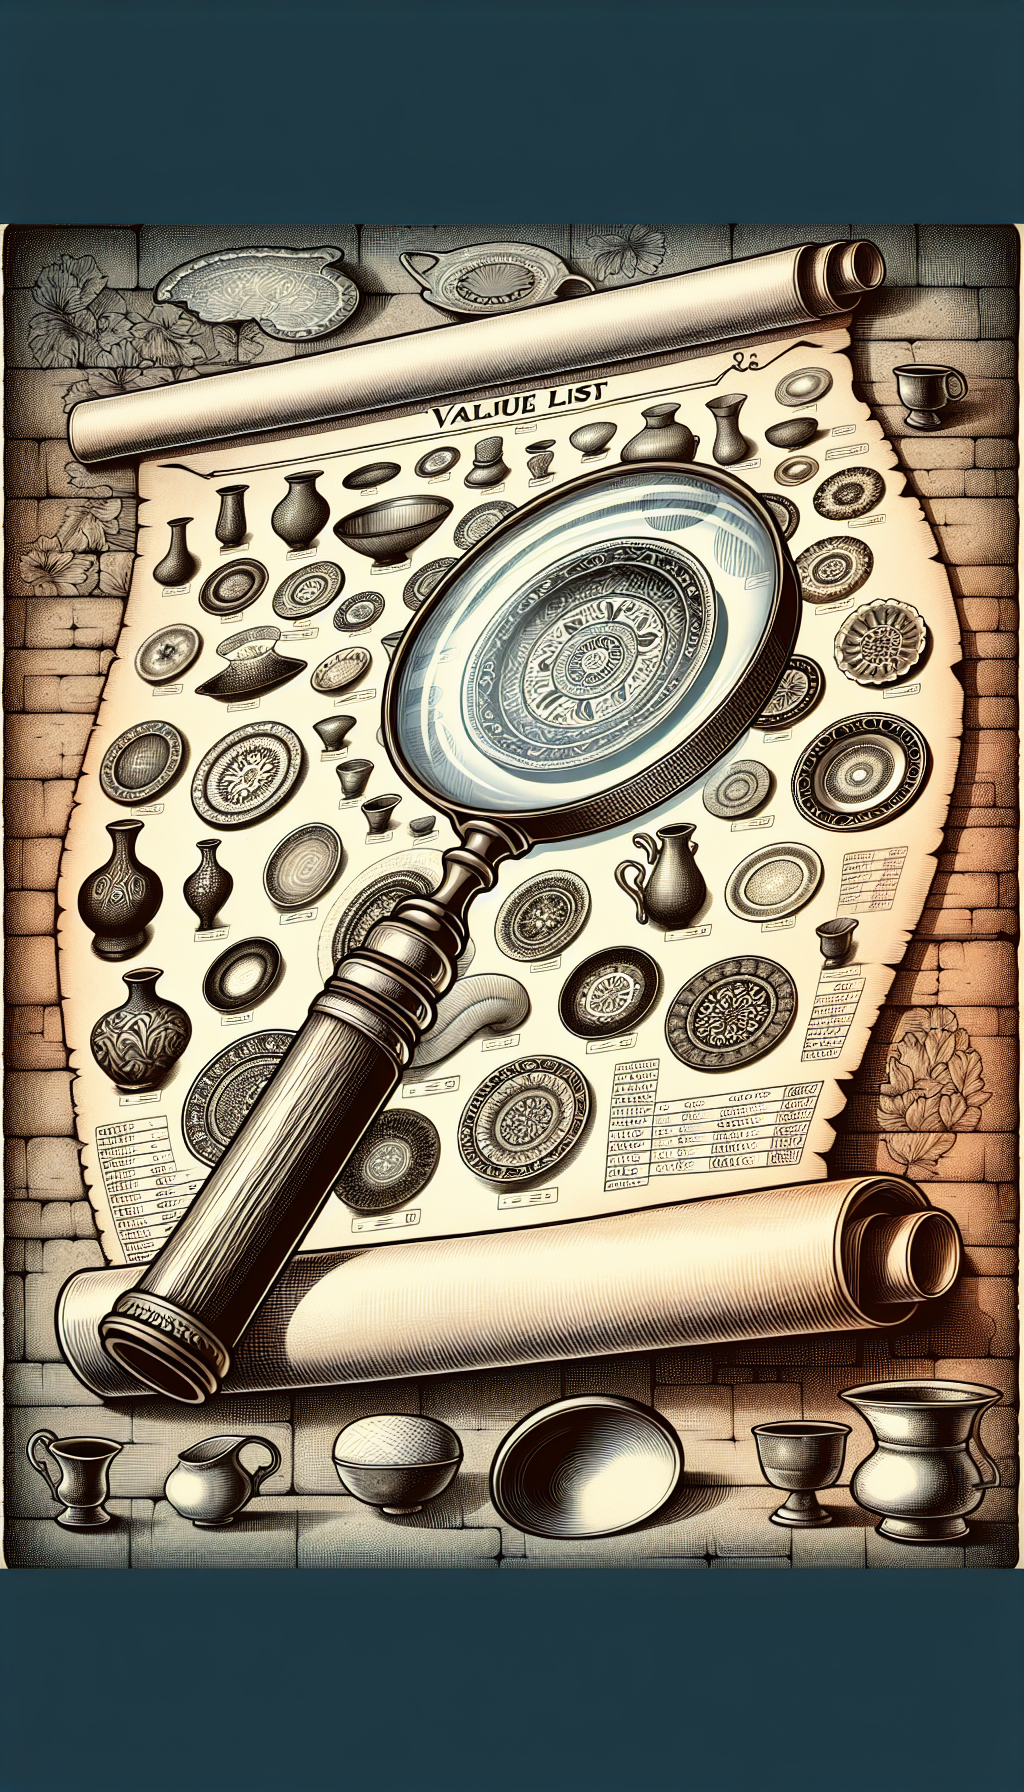 An intricate illustration featuring a magnifying glass hovering over a collection of ornate antique dishes, each with a distinct, stylized maker's mark glowing as if revealing hidden secrets. Beneath, a scroll unfurls, displaying a 'value list' with antique dishes ranked, blending styles from vintage etchings to vibrant watercolors to symbolize the diversity of dishes and their varying worth.